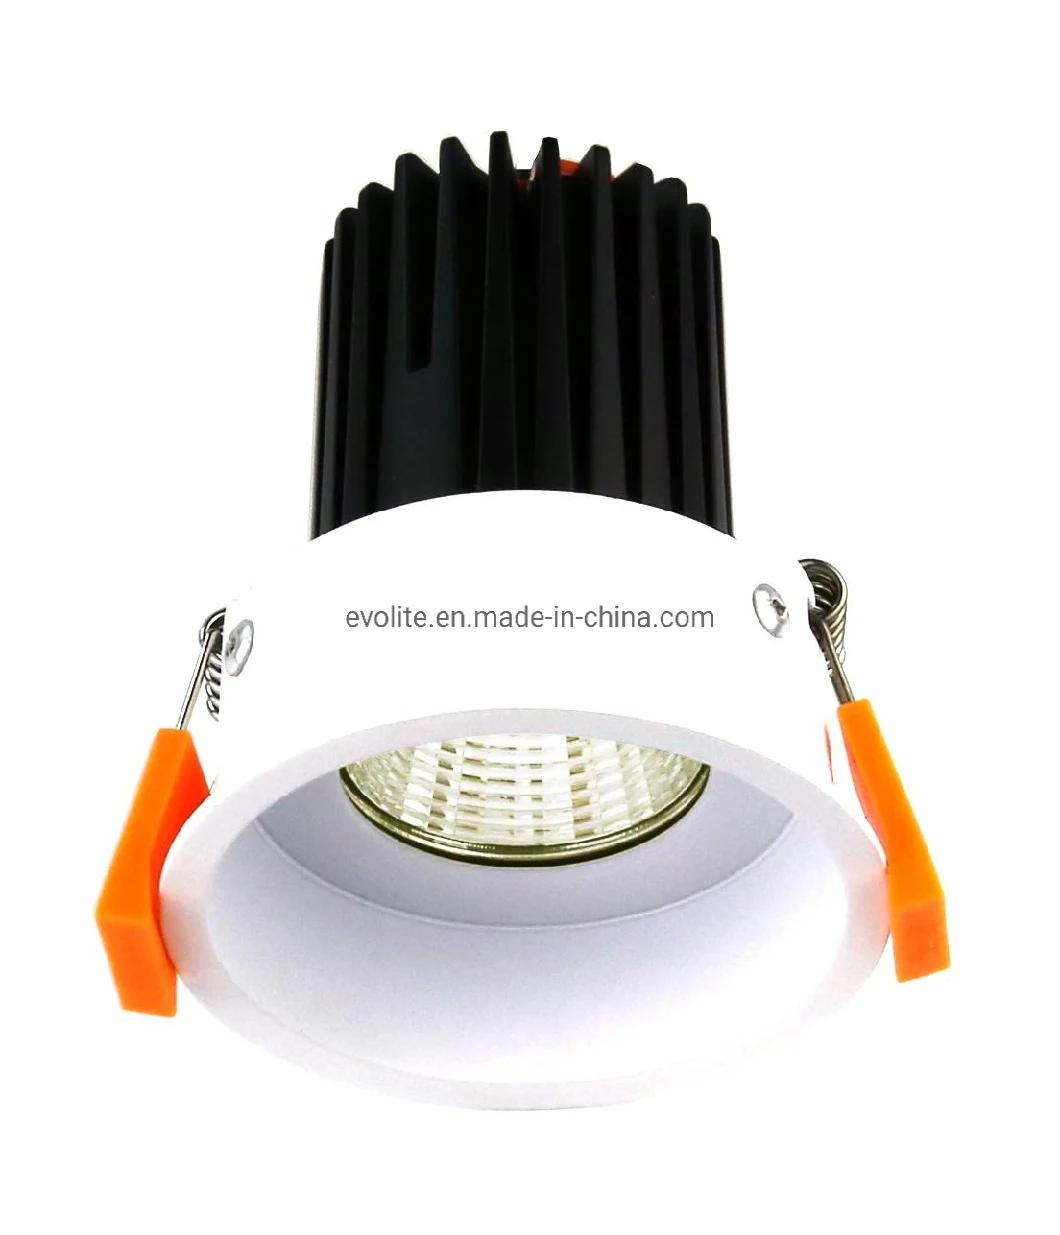 China Manufacturer Wholesale Gold Color GU10 COB Downlight Recessed Downlight MR16 Cover